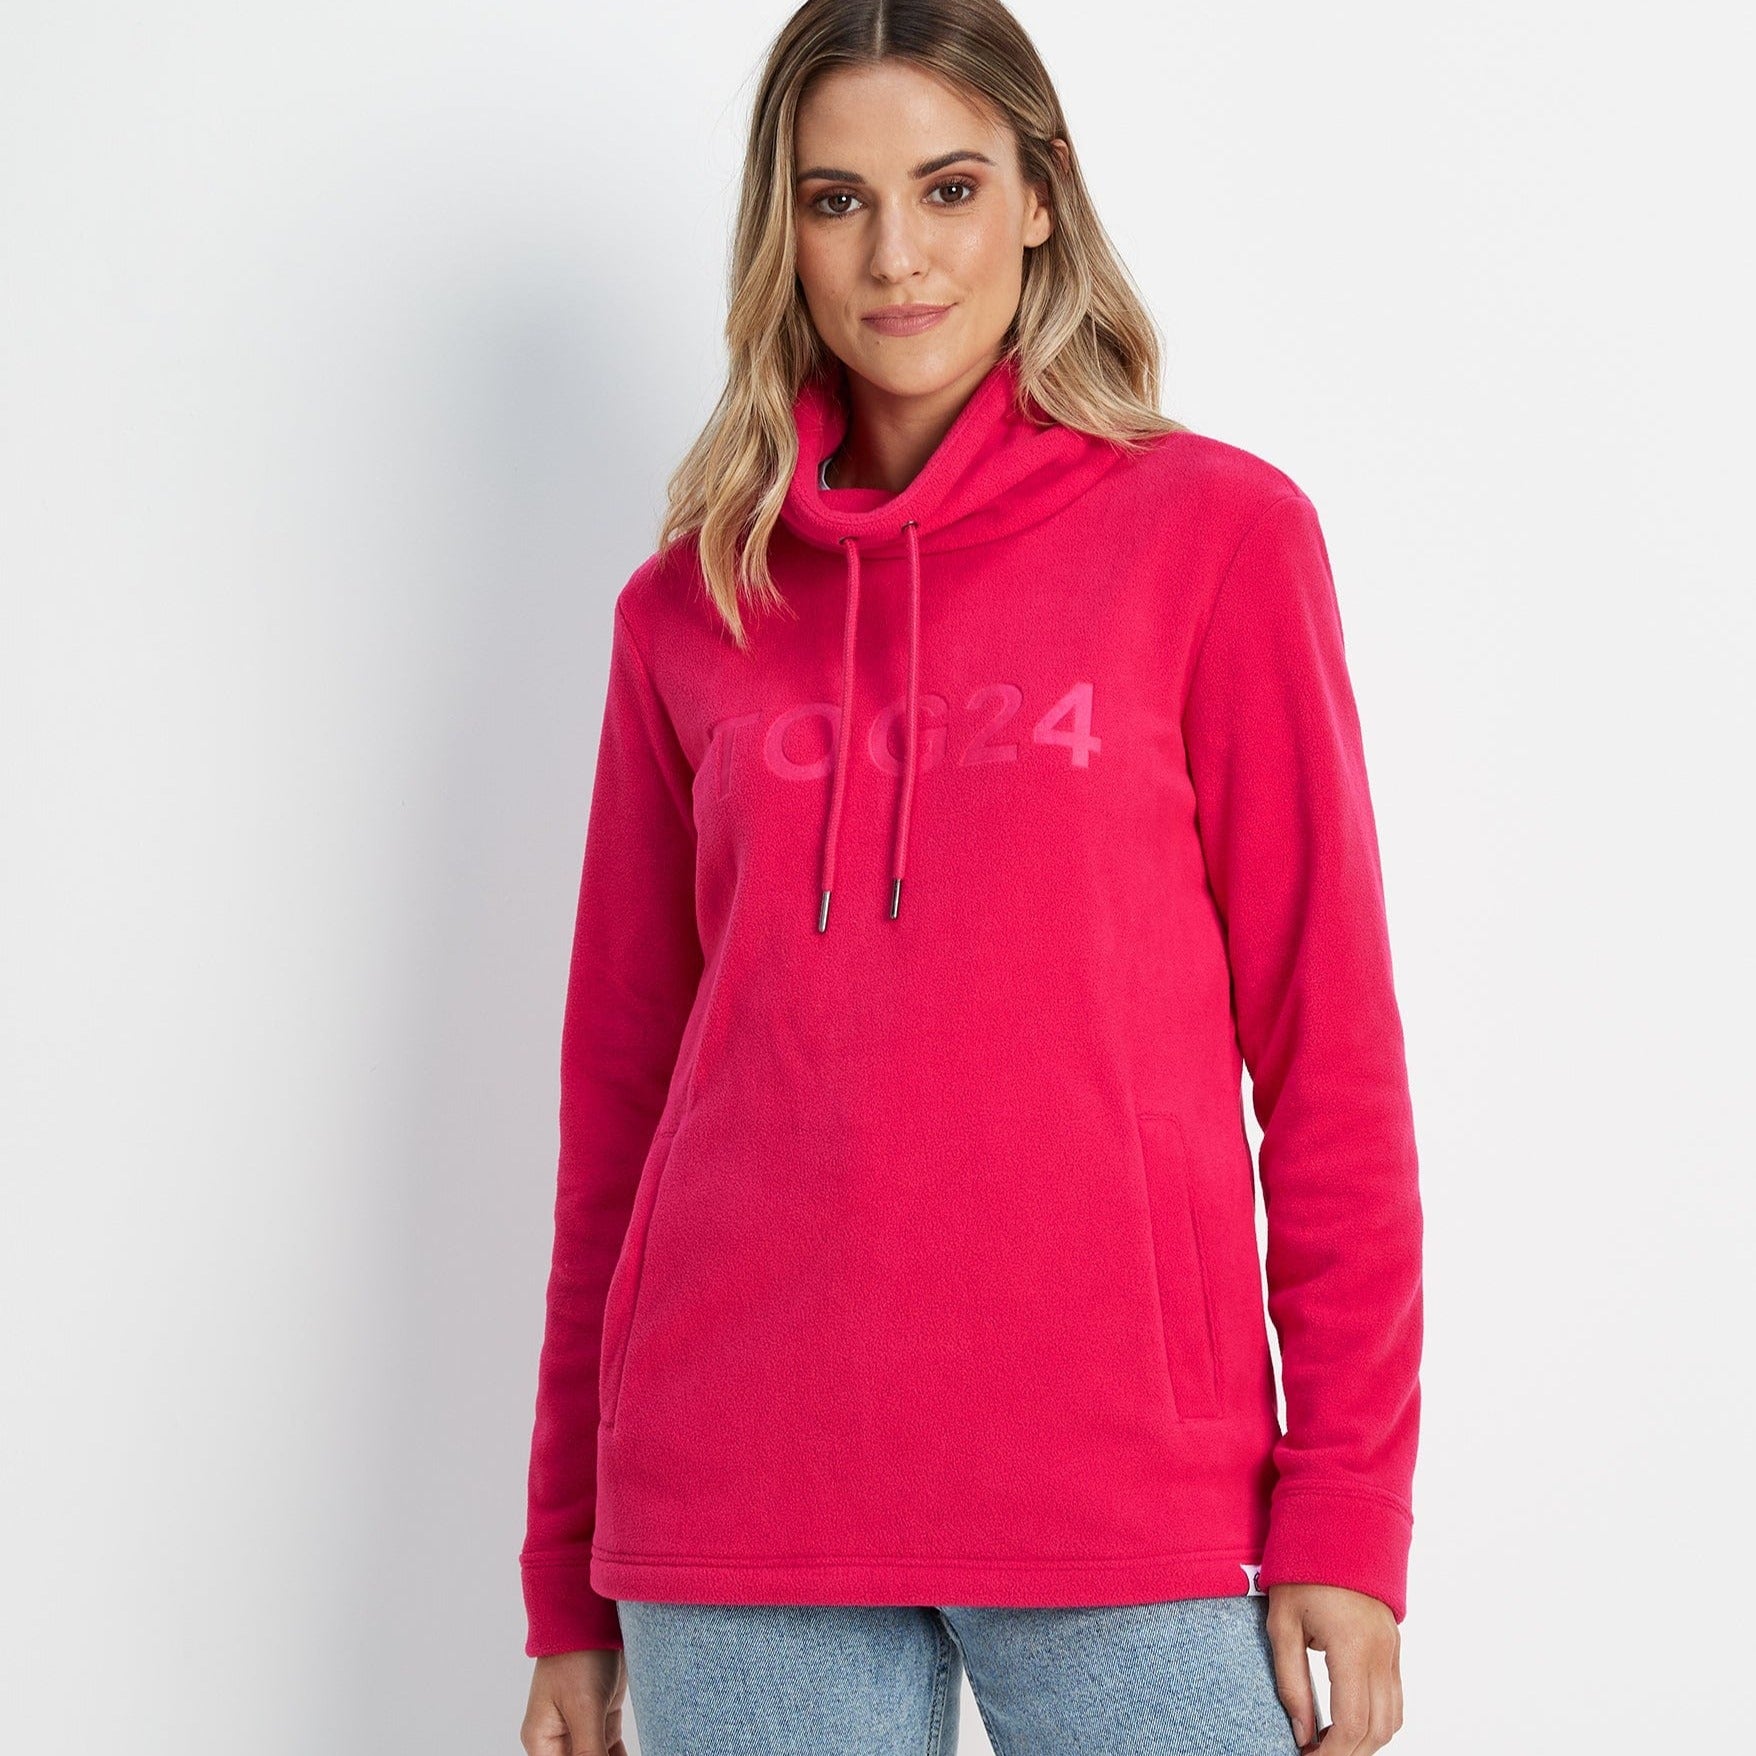 TOG24 Kirkby Womens Funnel Neck Jumper In Cosy Super Soft, Warm ...